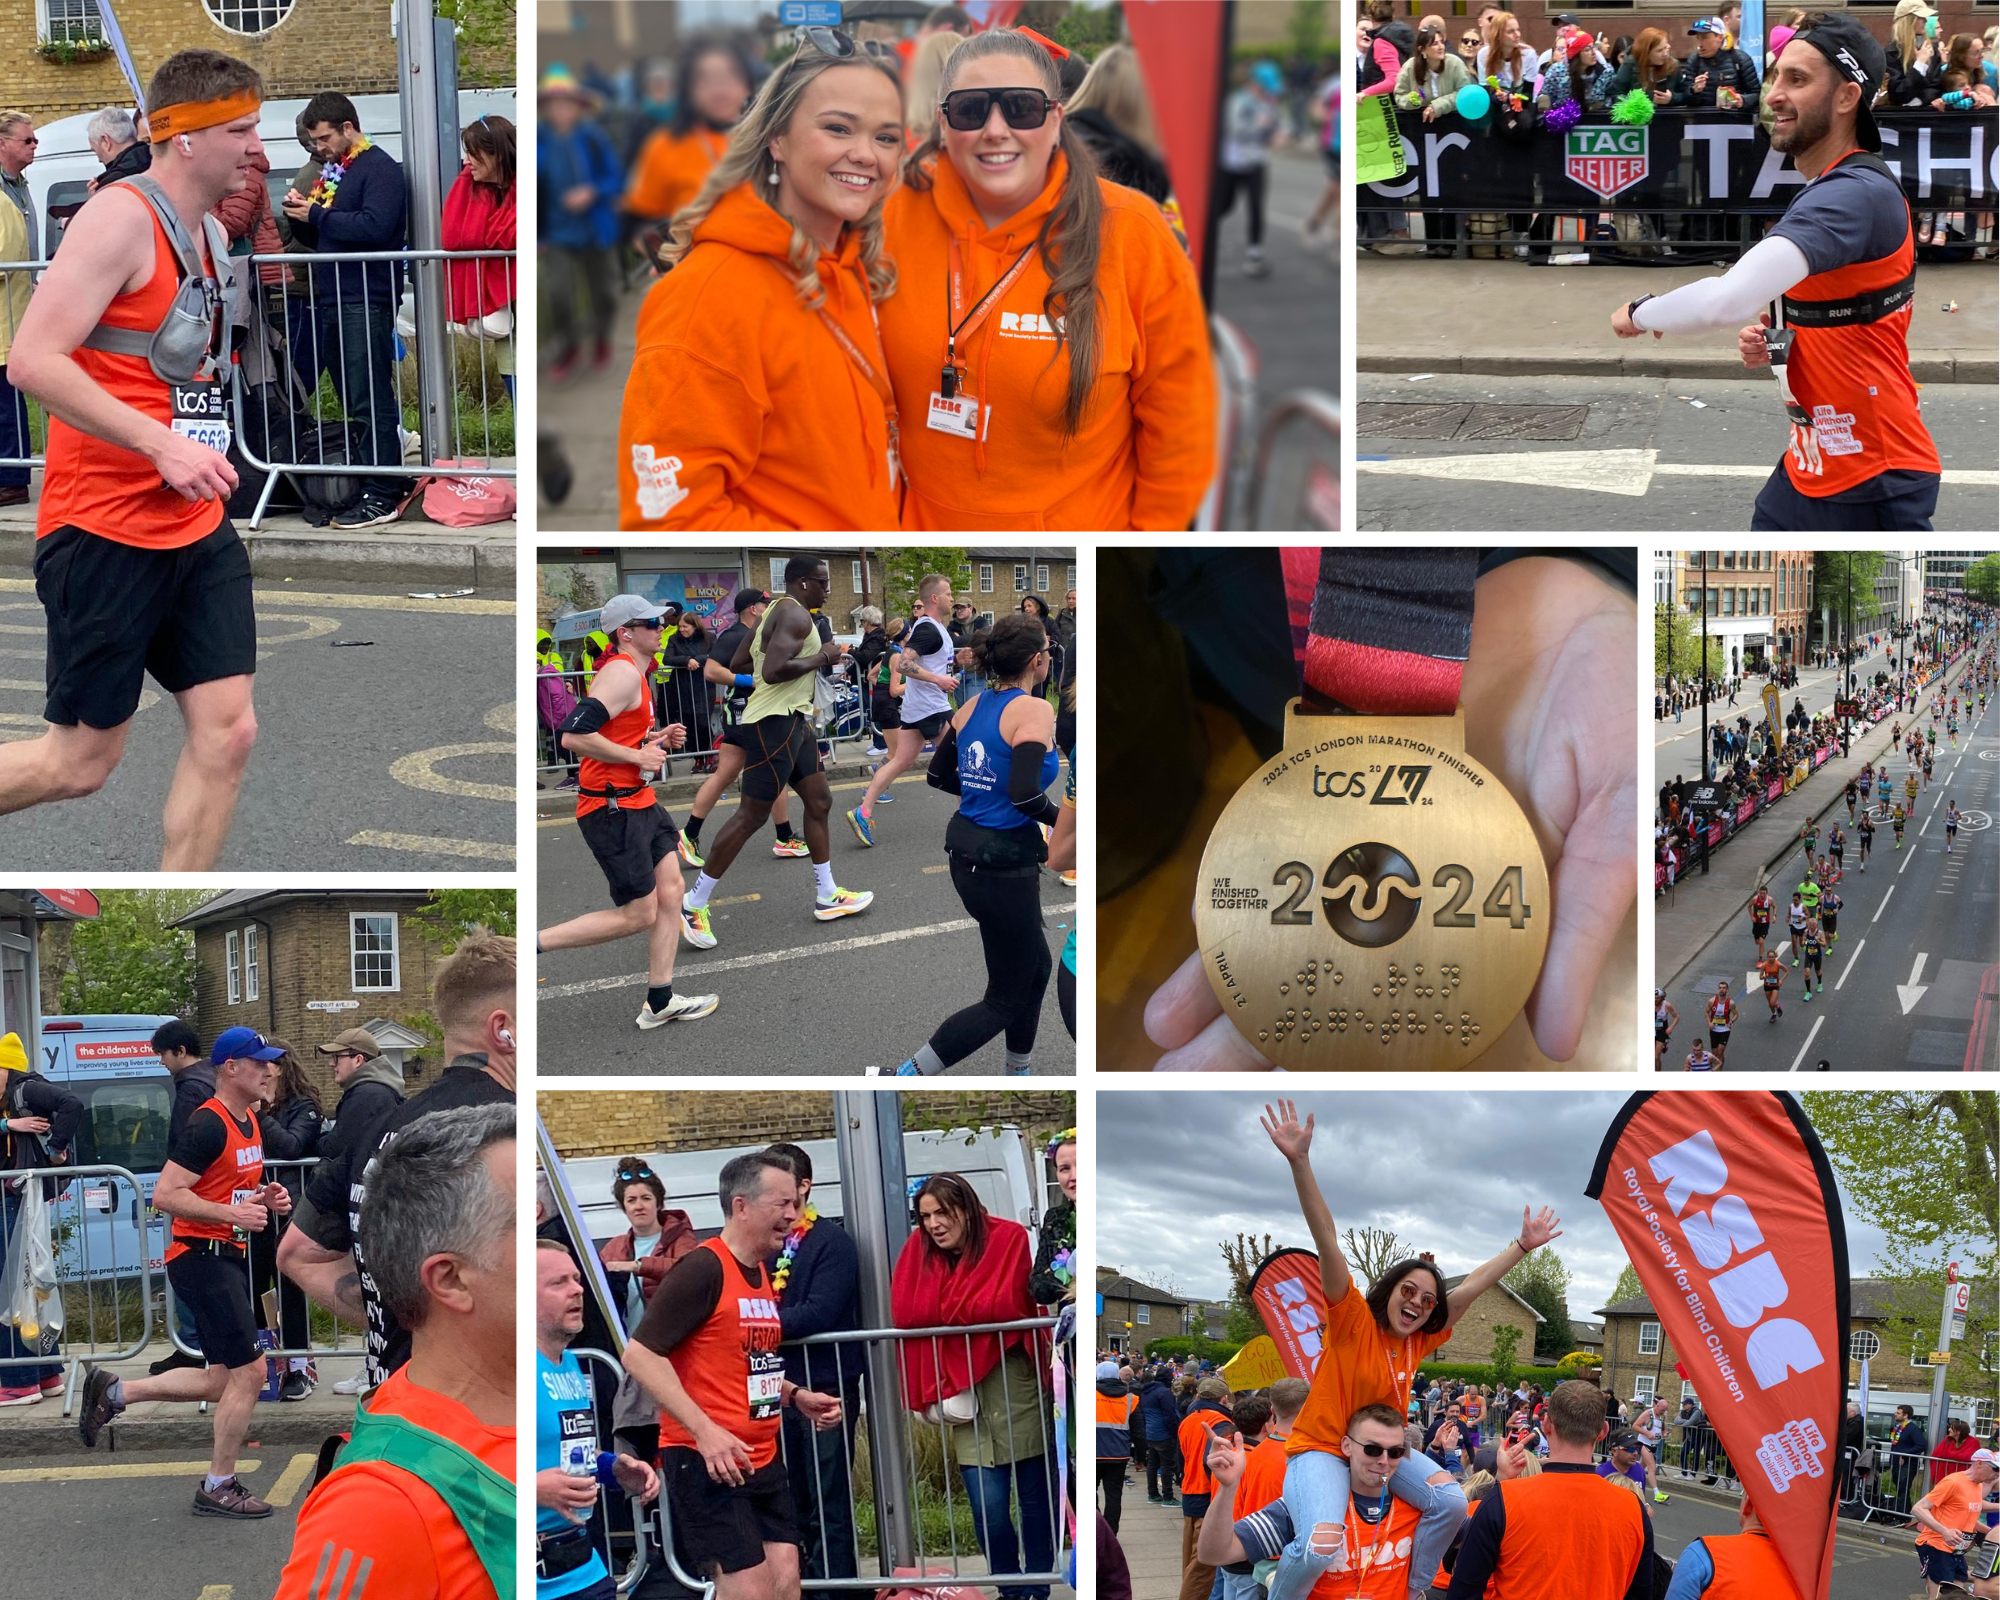 A photo album of 9 images from the London Marathon. Runners on the street of London, 2 female volunteers posing for the camera, a close up of a marathon medal and a female volunteer sitting on the shoulders of a male volunteer with her arms raised high waving to the camera.